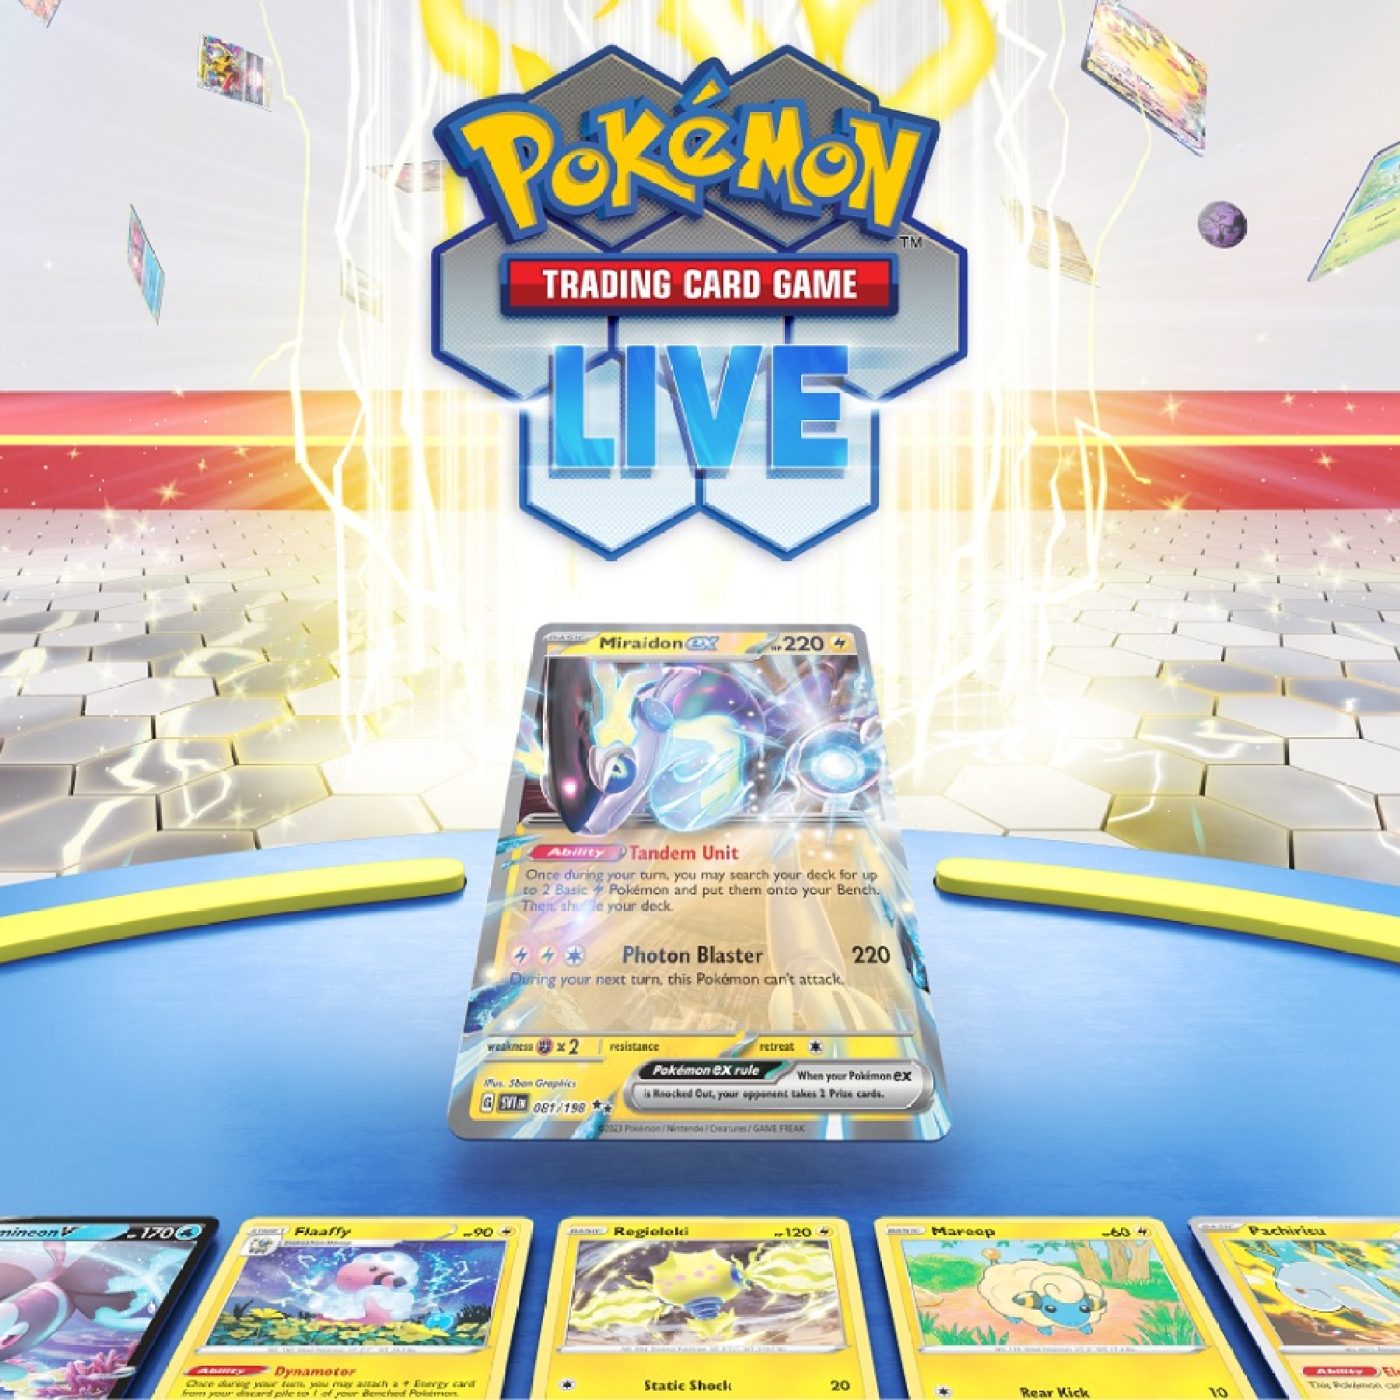 Pokémon Live (the online card game mobile app) uses ISO : r/ISO8601